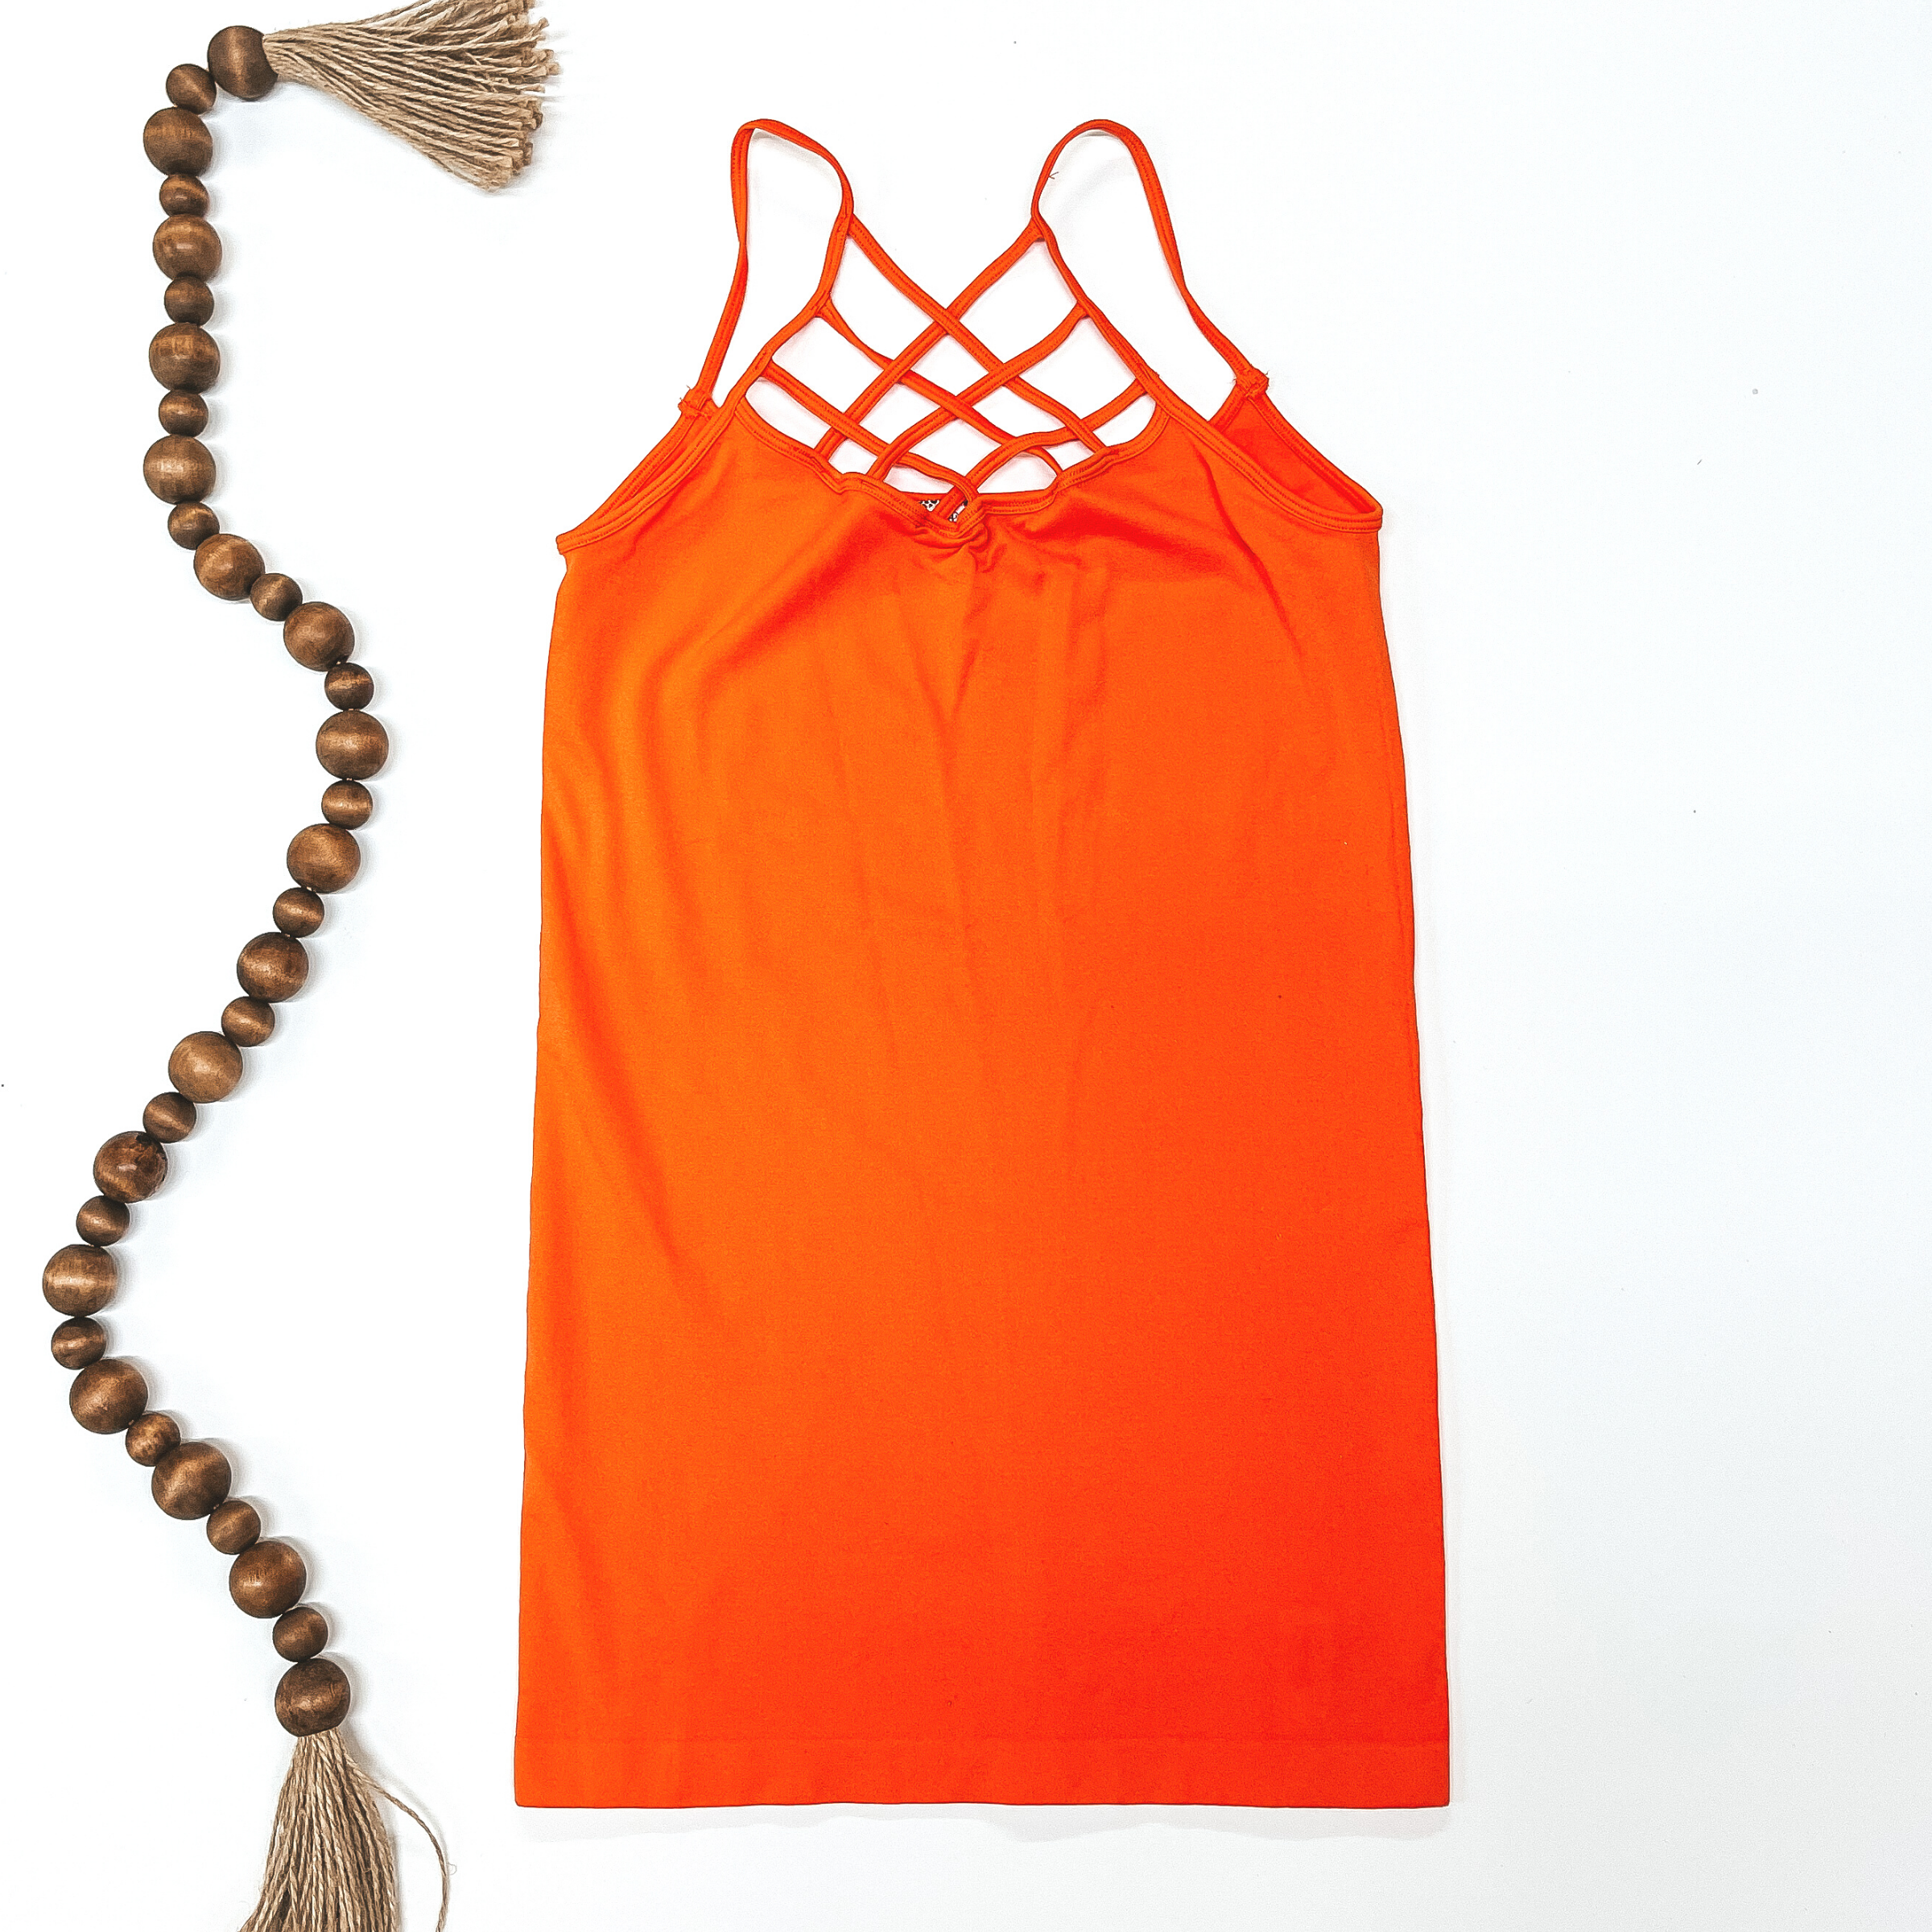 Crossing The Limits Strappy Camisole in Orange - Giddy Up Glamour Boutique